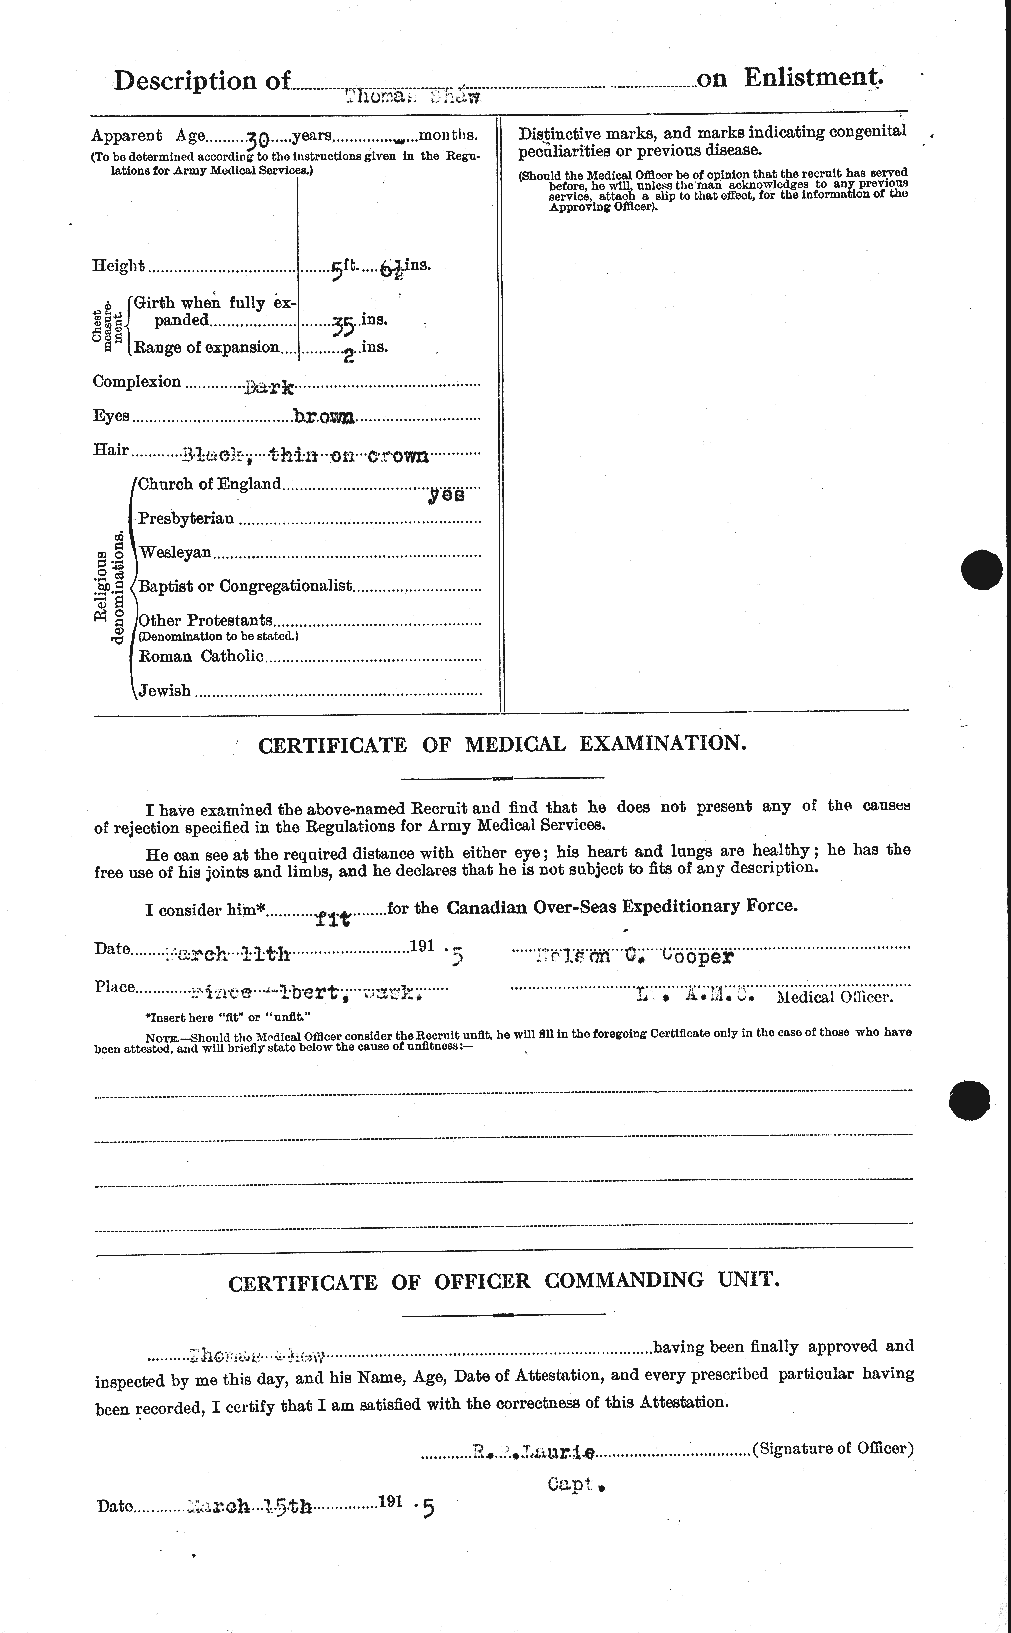 Personnel Records of the First World War - CEF 089628b